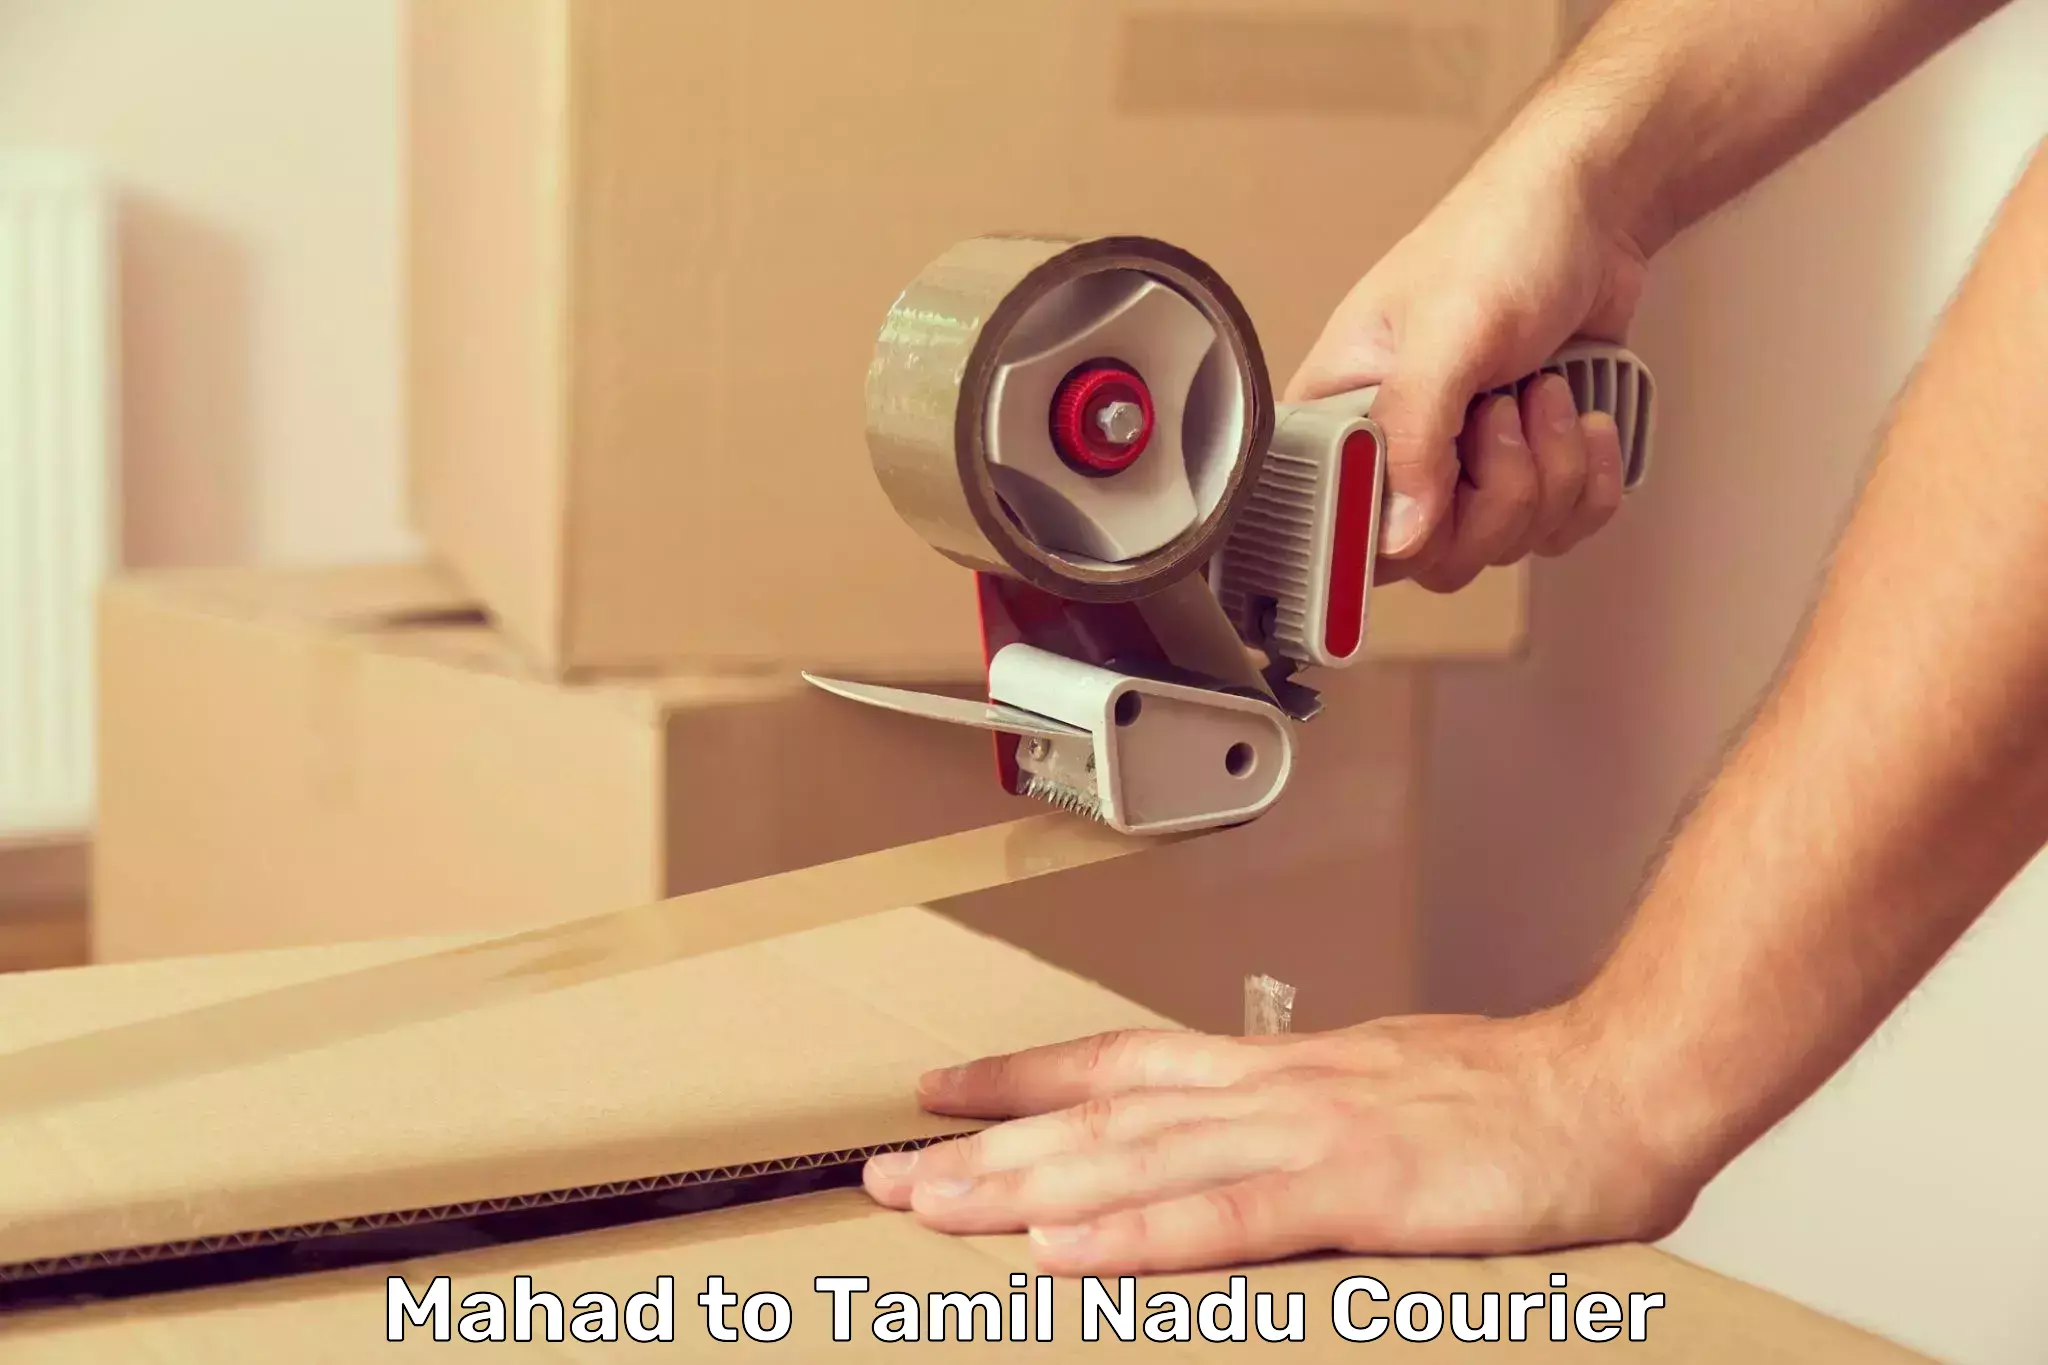 Personal courier services Mahad to Sriperumbudur